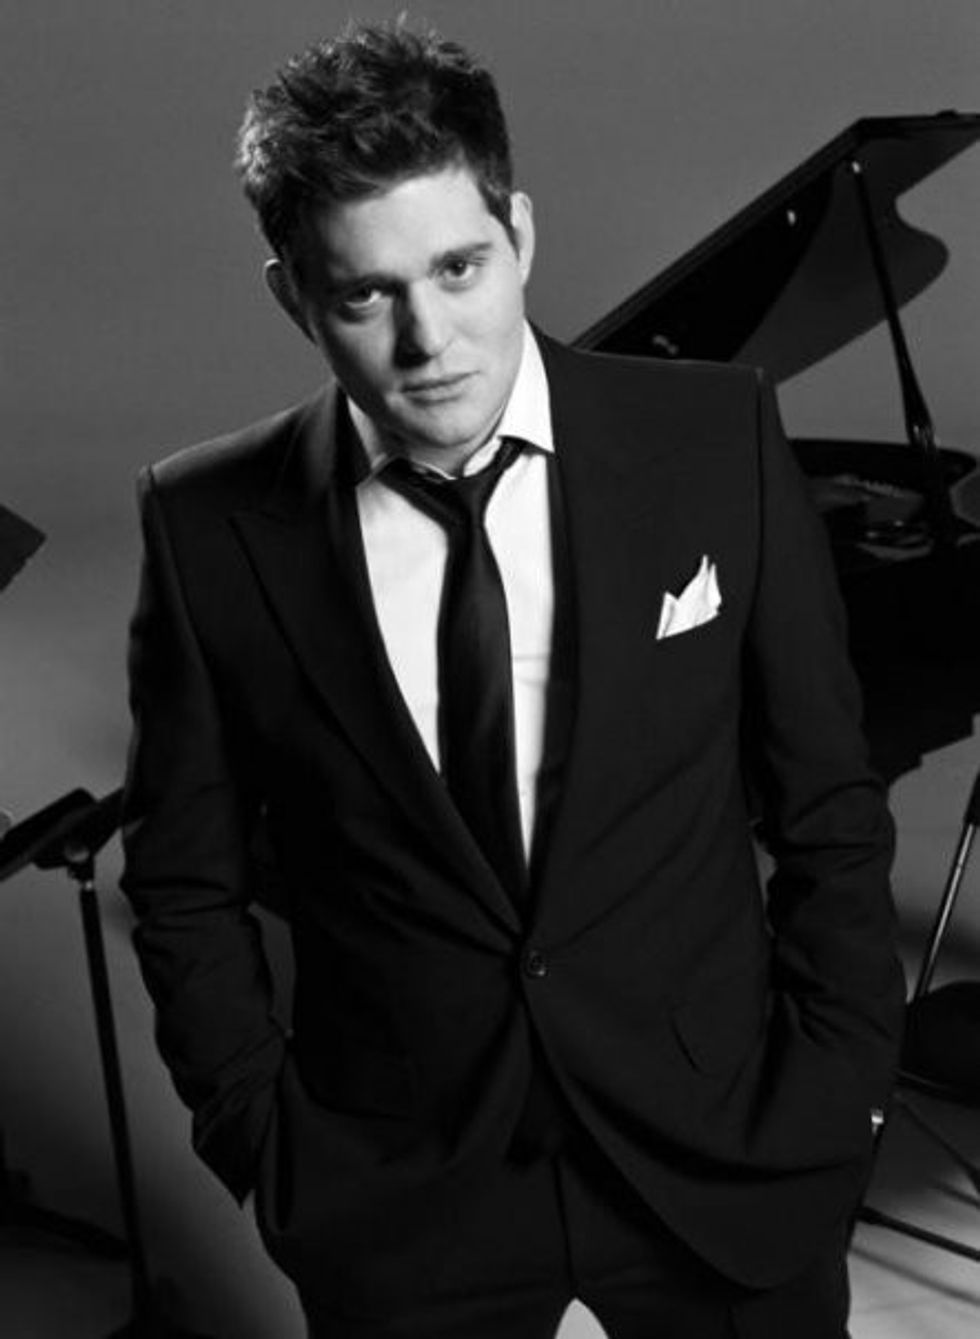 Mimi and Michael Bublé Topped the Charts In Christmas Week